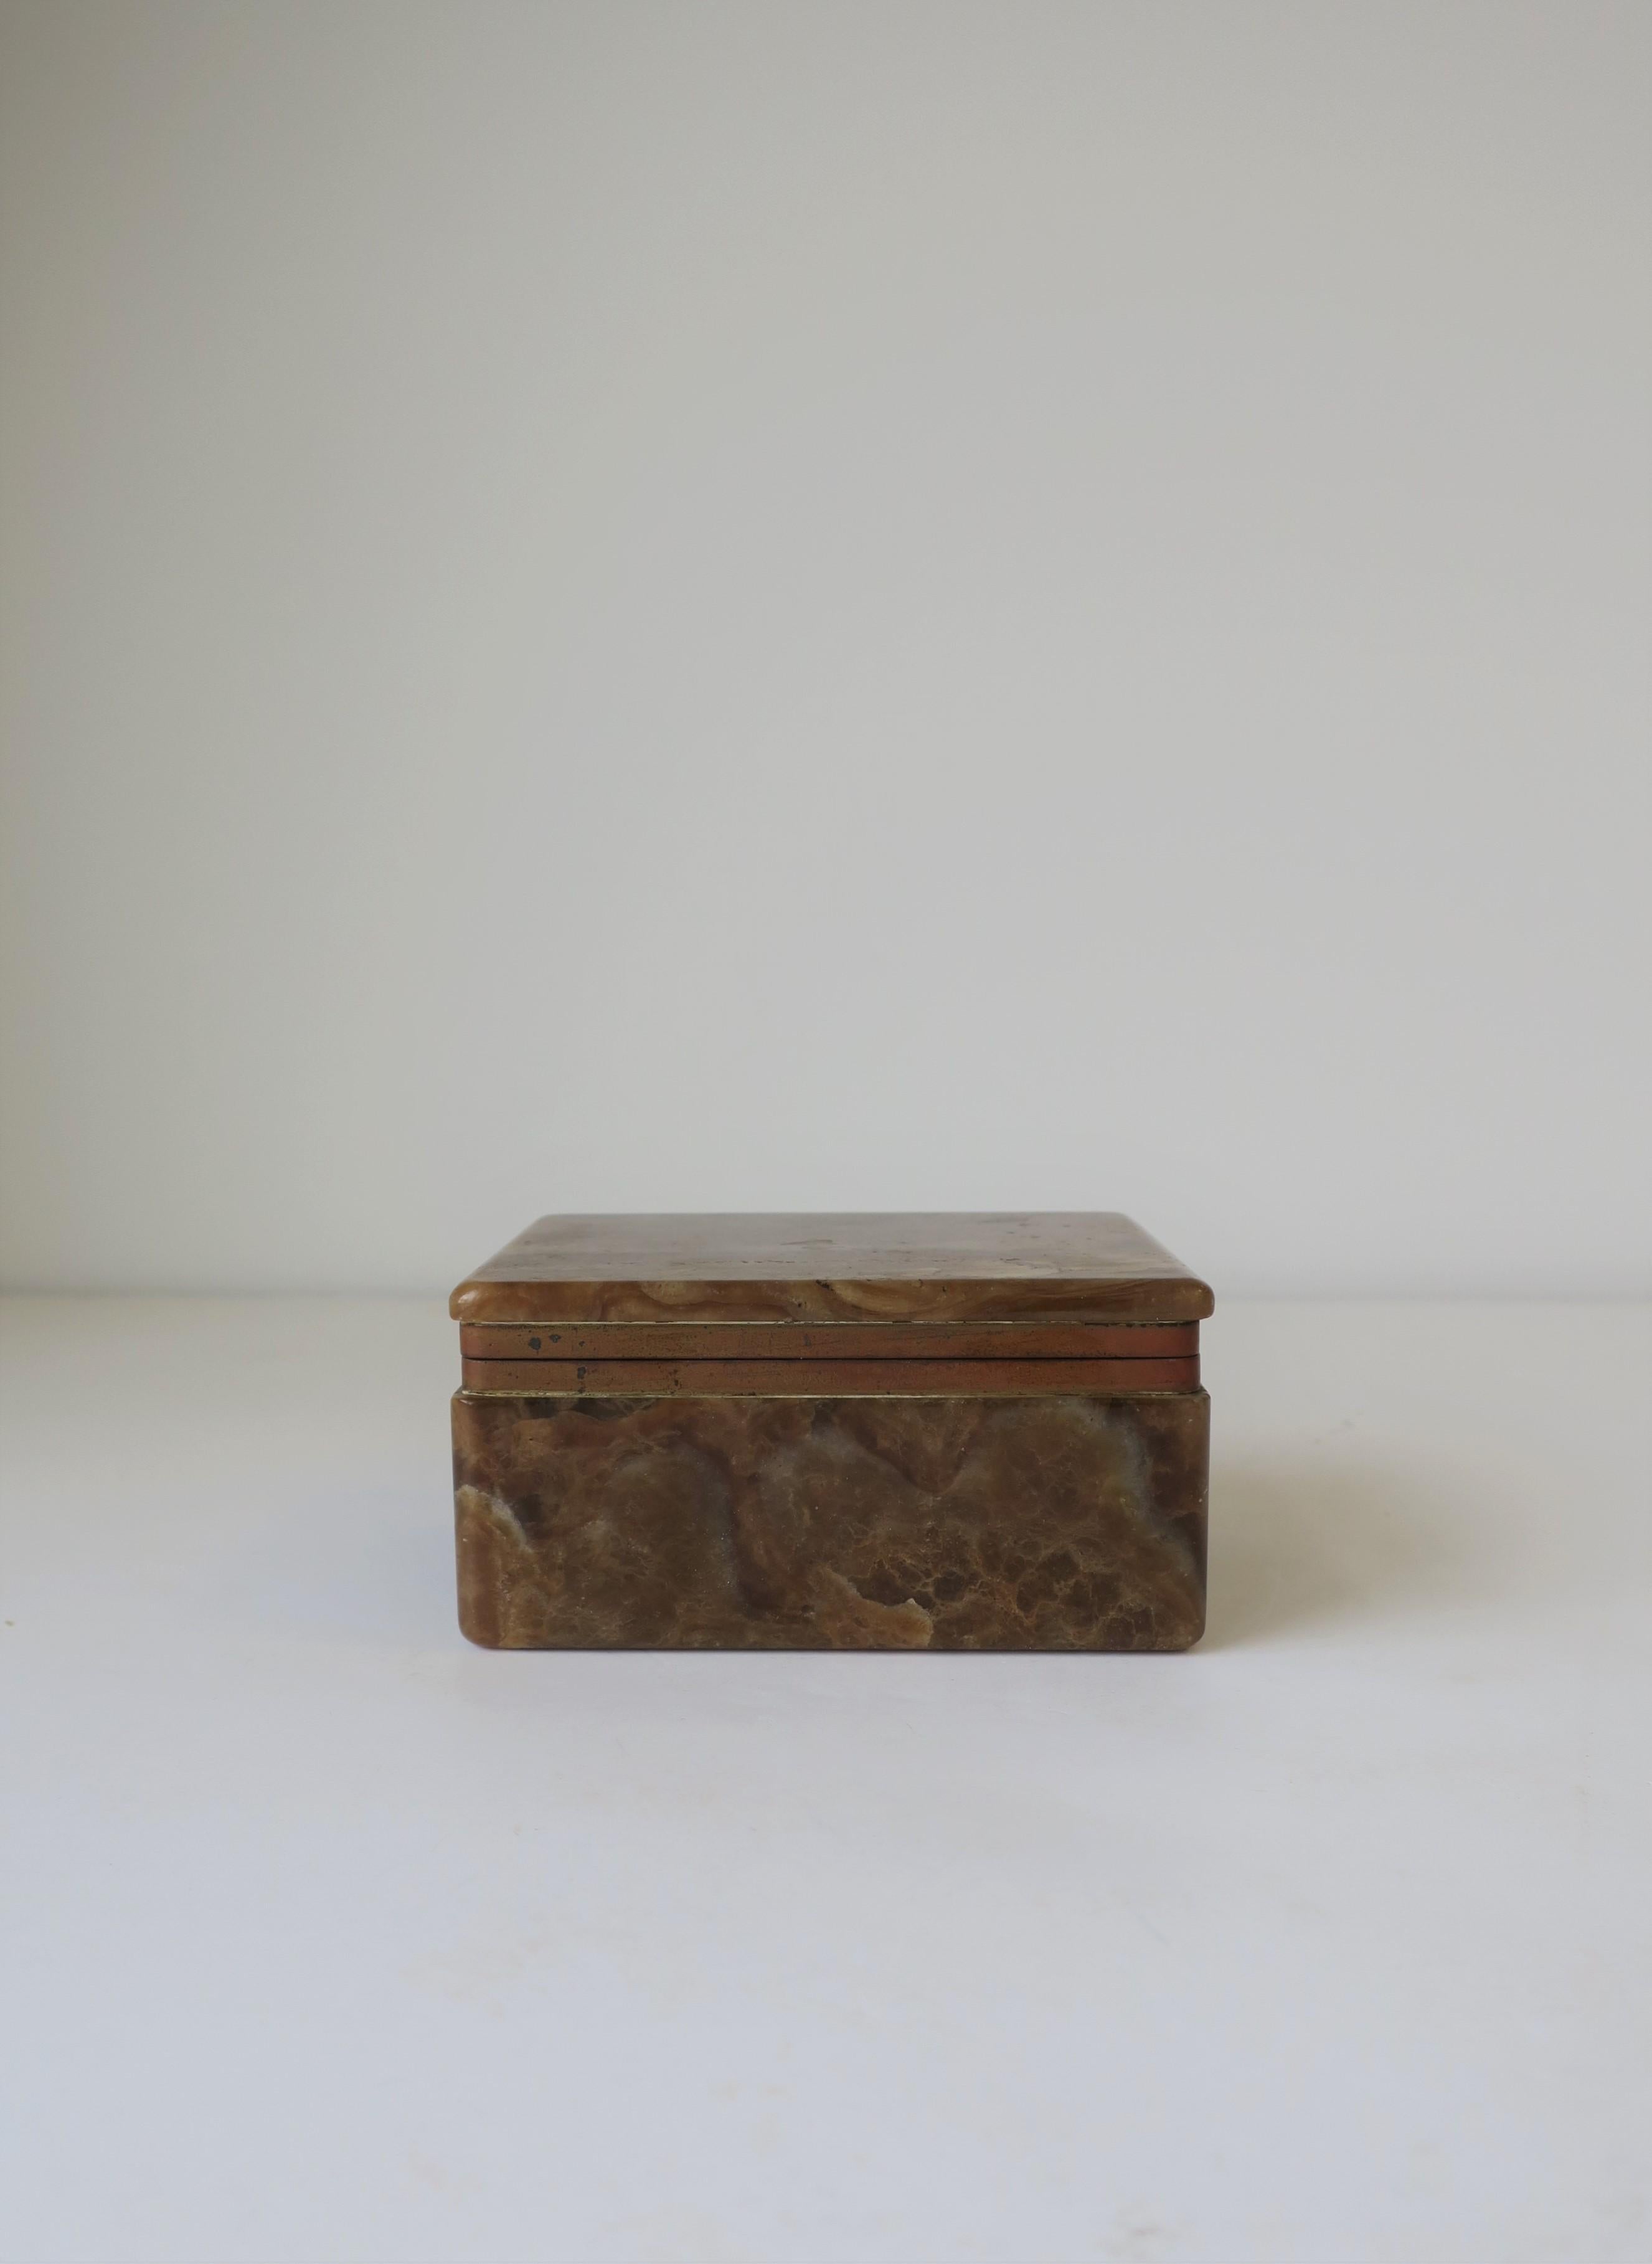 A very beautiful, substantial Belgian modern brown, caramel, and white onyx marble and brass hinged box, circa early to mid-20th century, Belgium. Box is rectangular in shape and can hold jewelry (as demonstrated) or other small items on a desk,